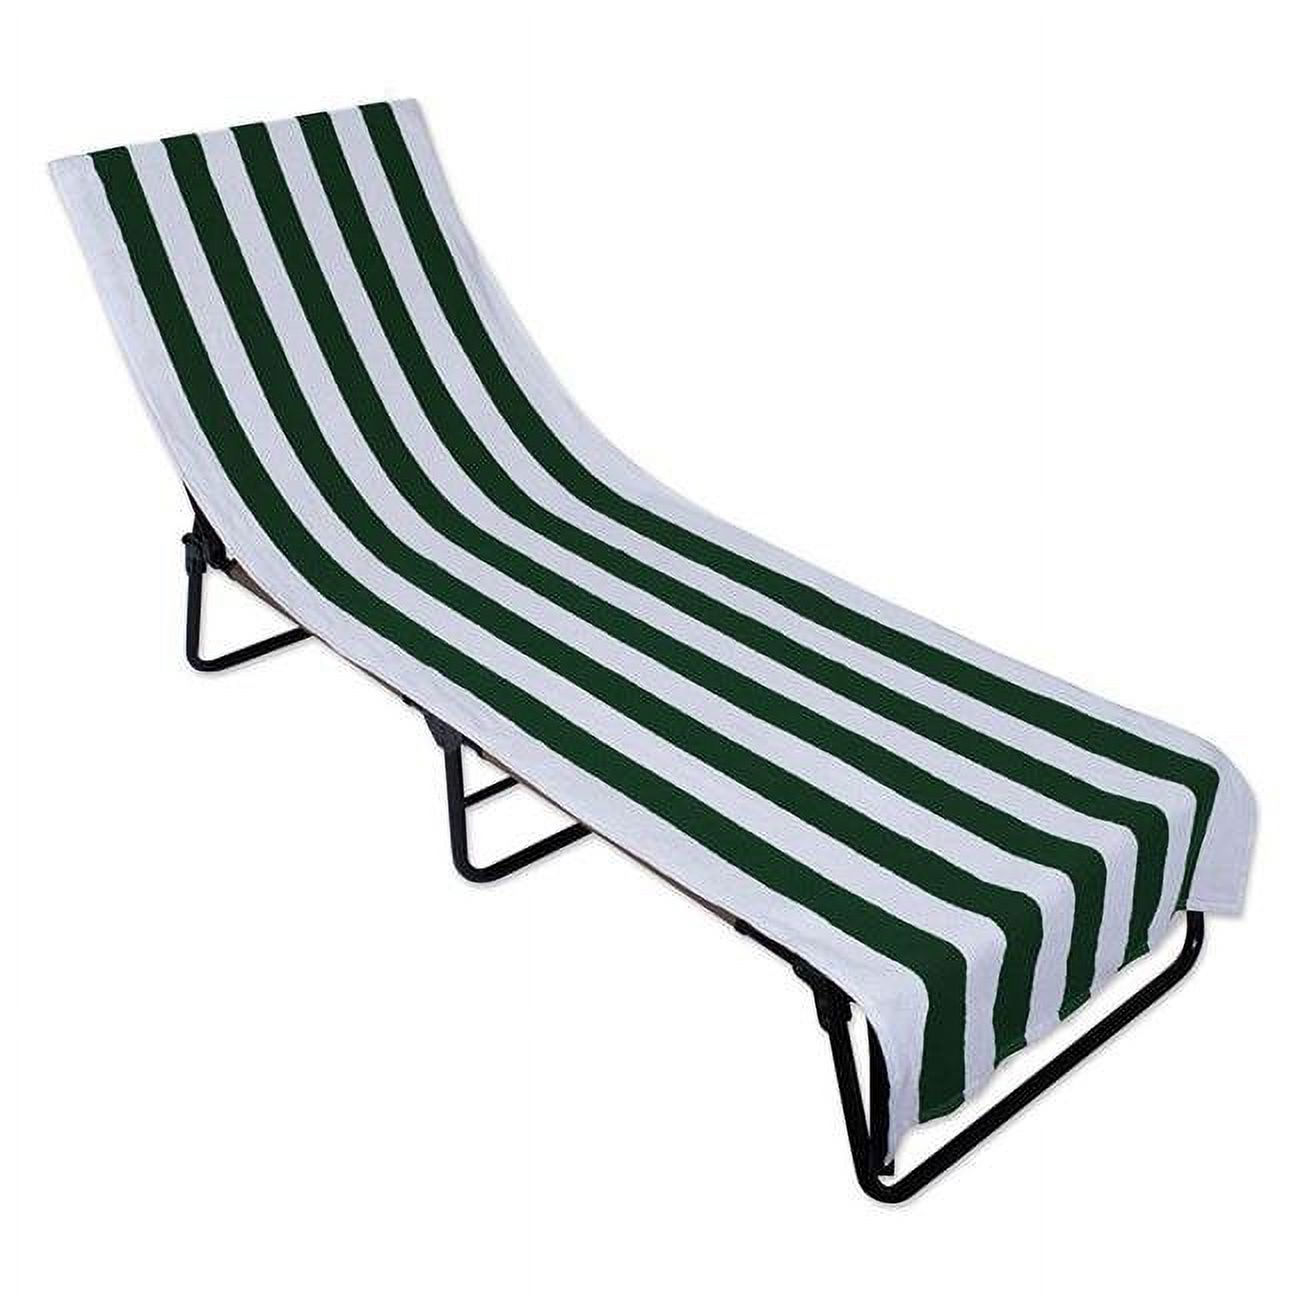 26 x 82 in. Hunter Green Stripe Lounge Chair Beach Towel With Top Fitted Pocket - image 1 of 1